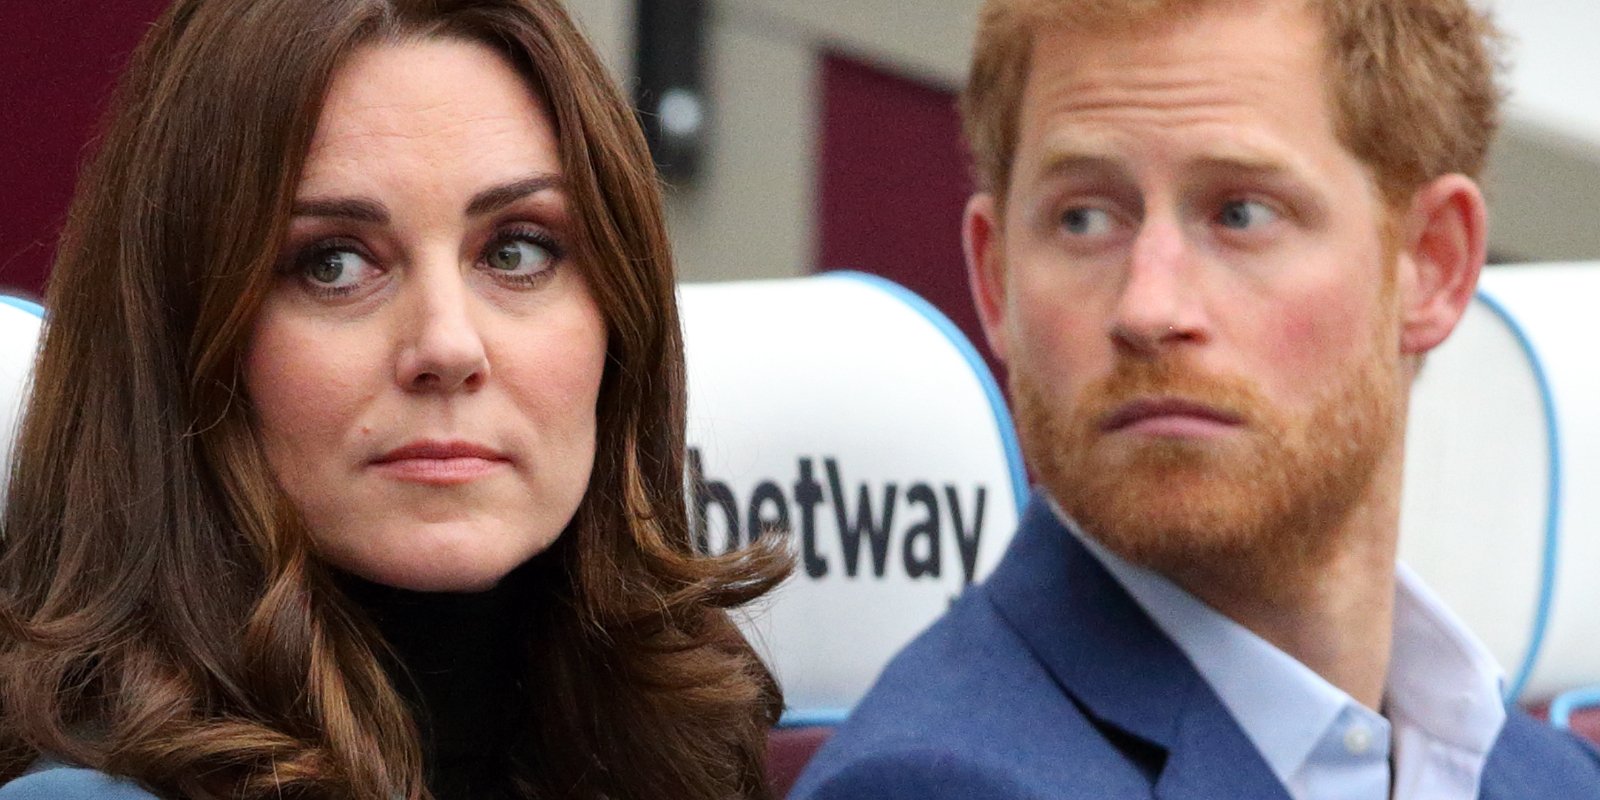 Kate Middleton and Prince Harry attend the Coach Core graduation ceremony for more than 150 Coach Core apprentices at The London Stadium on October 18, 2017 in London, England.